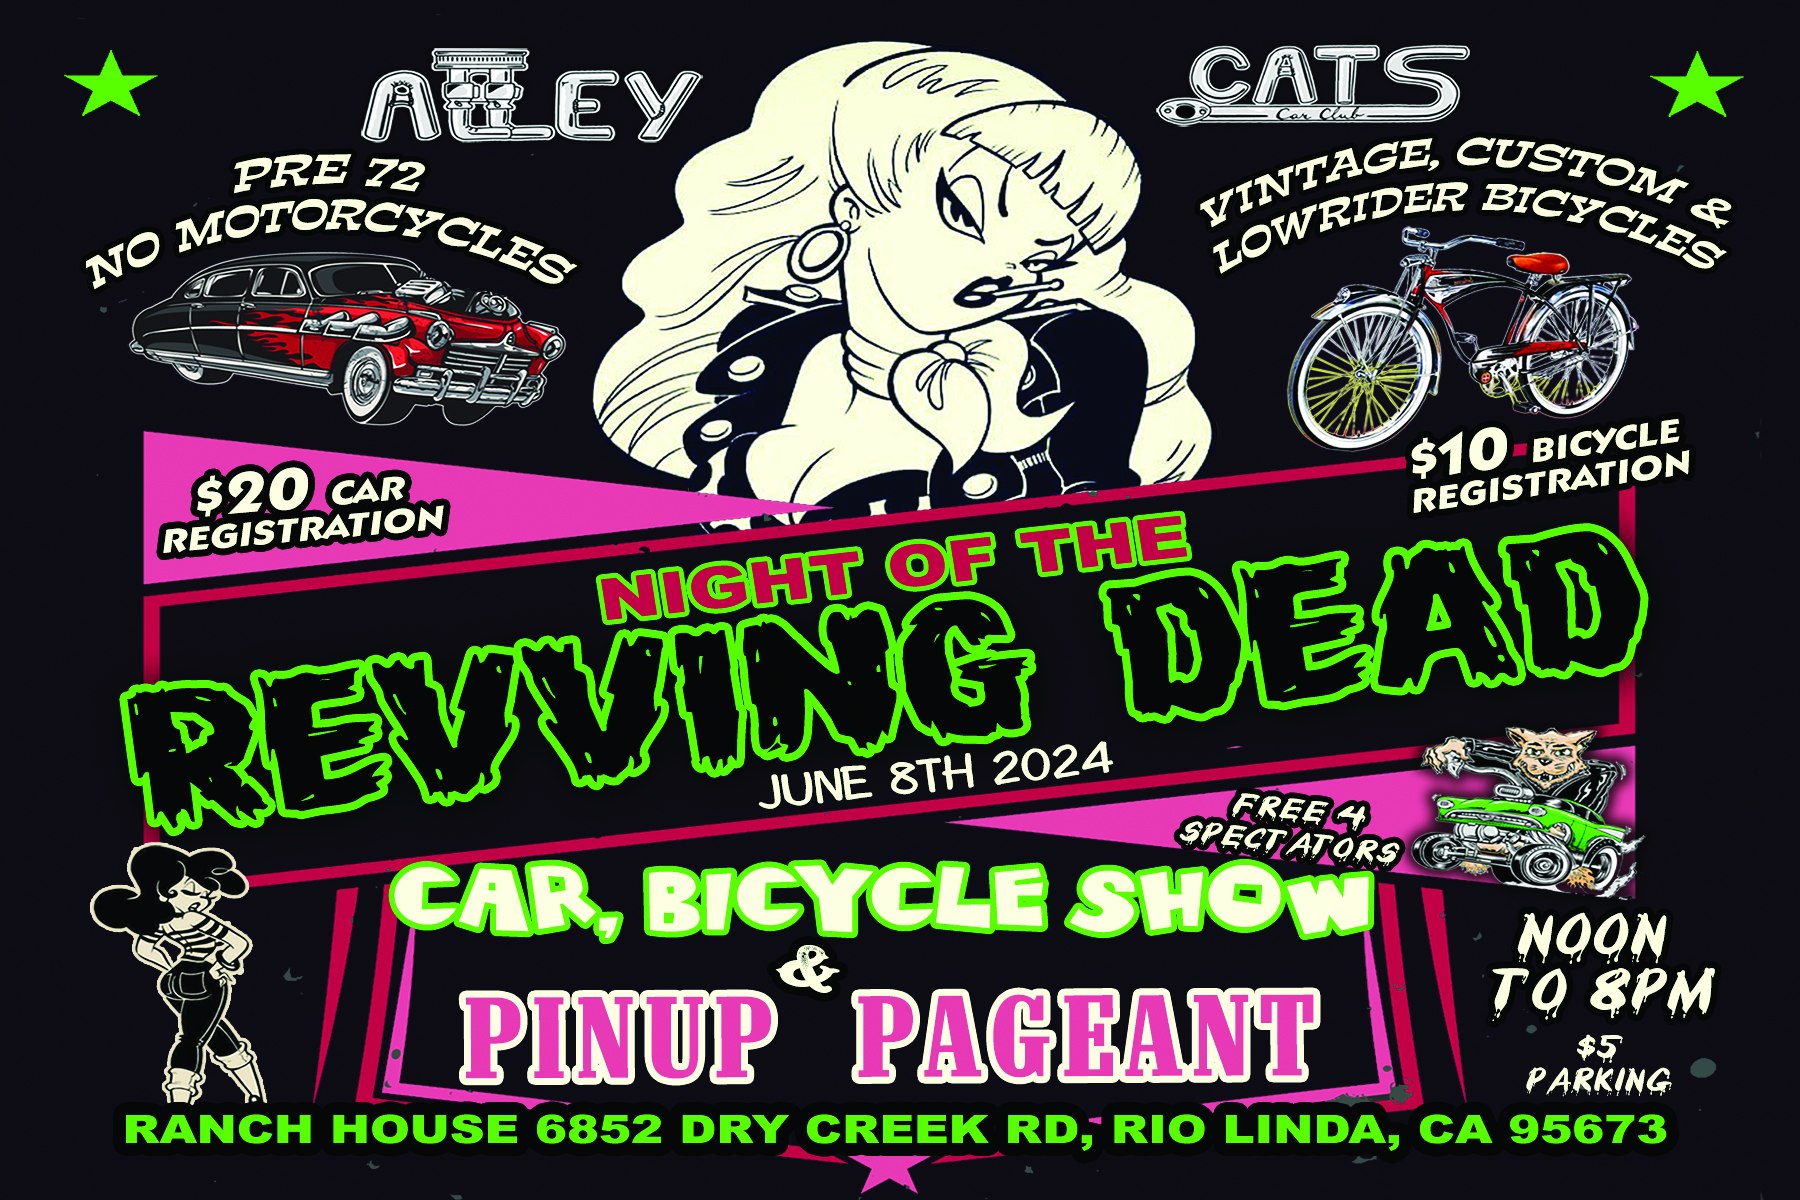 Night of the Revving Dead Car Show